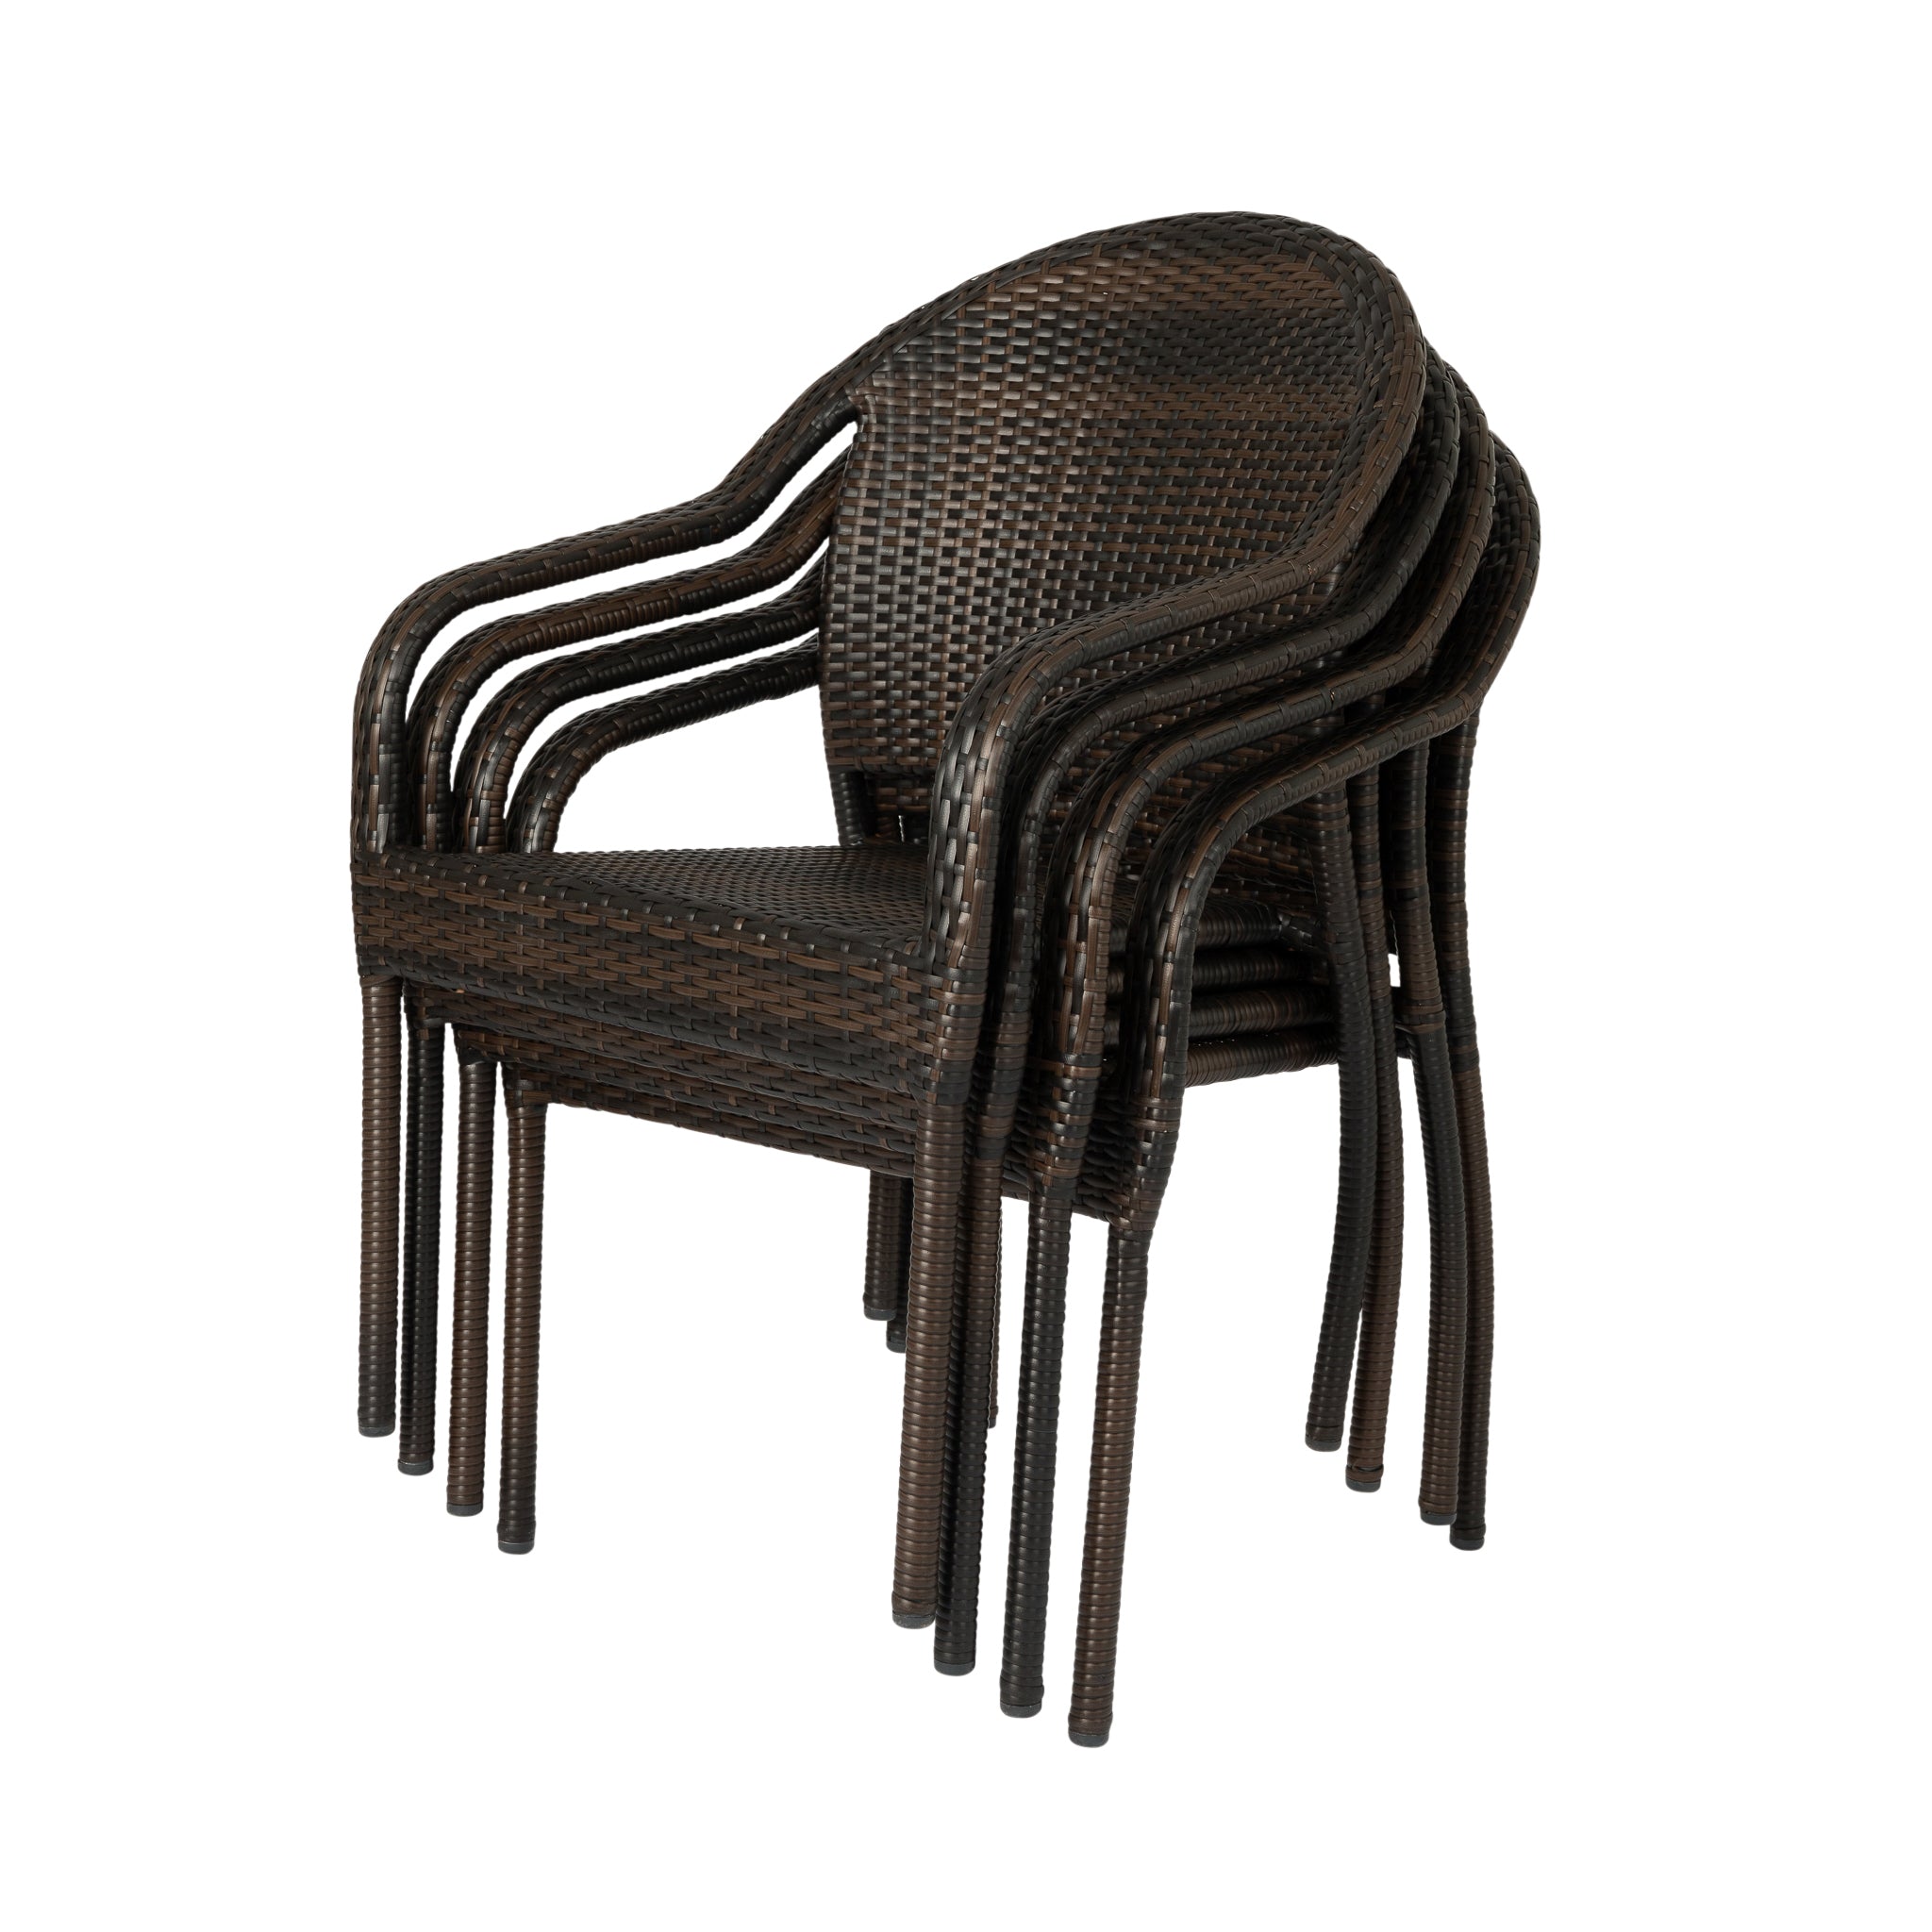 Wicker 4 - Rhodos All-Weather Café Stacking of in Chairs Set Mocha